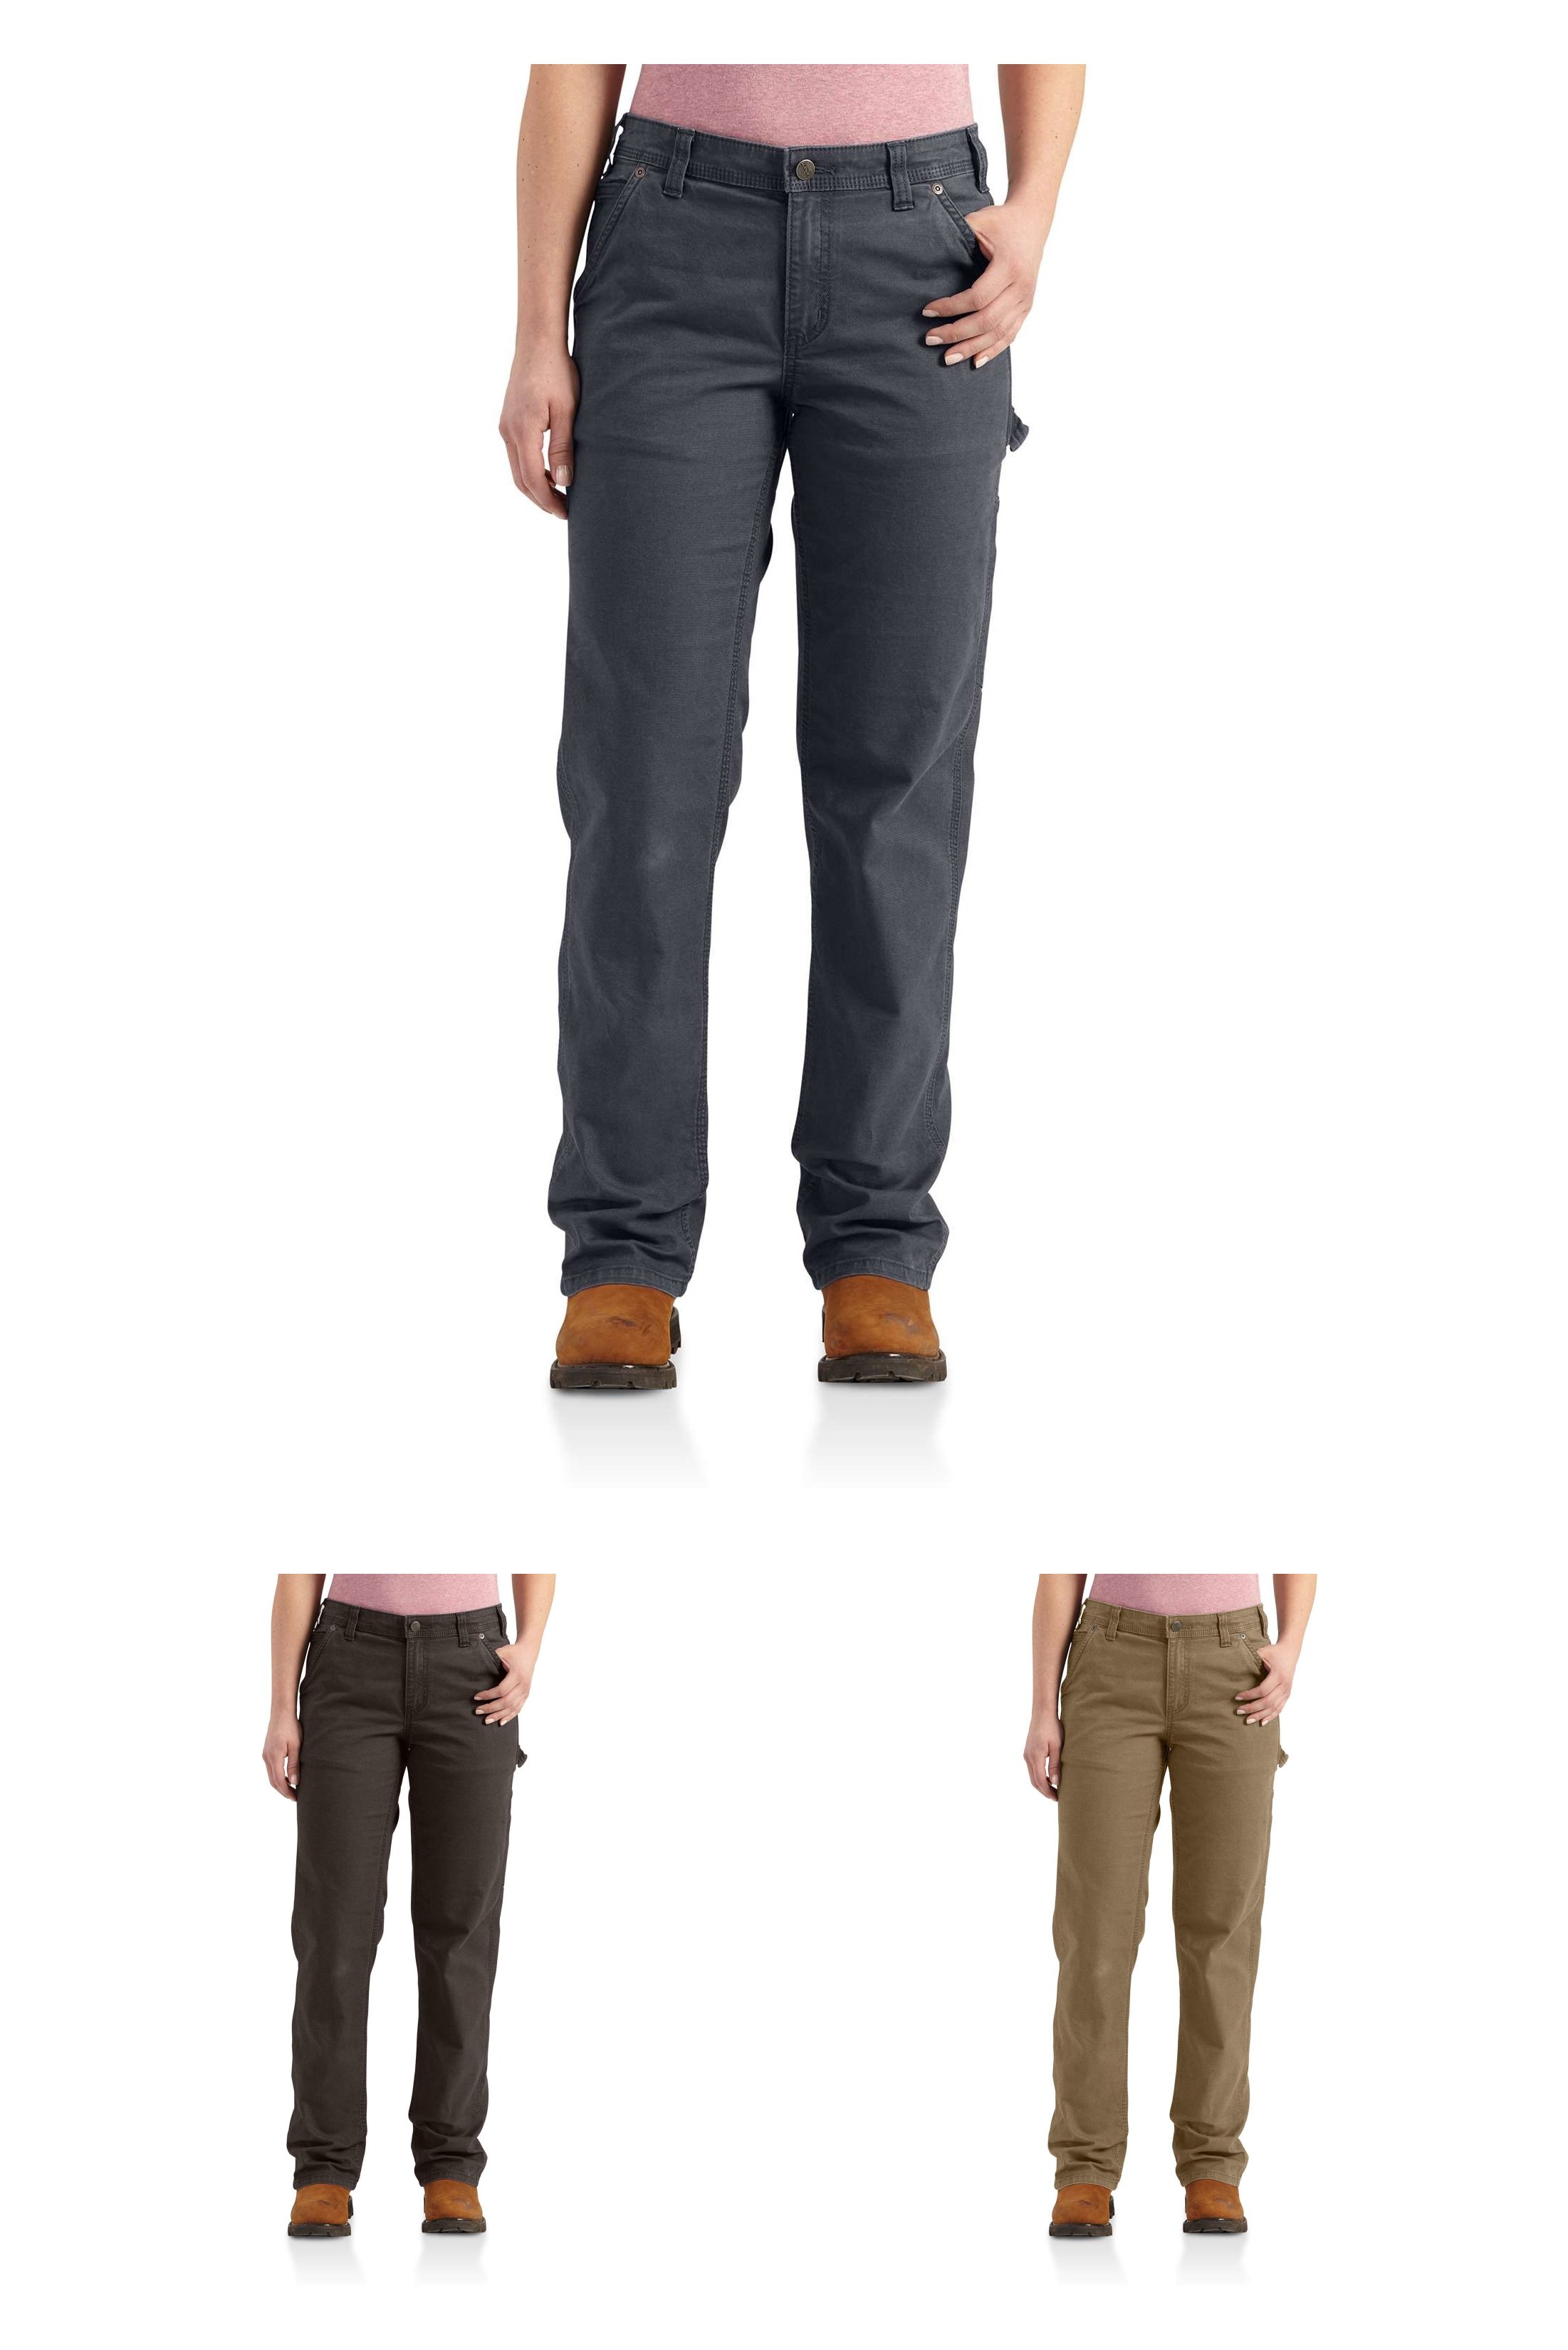 carhartt fitted pants